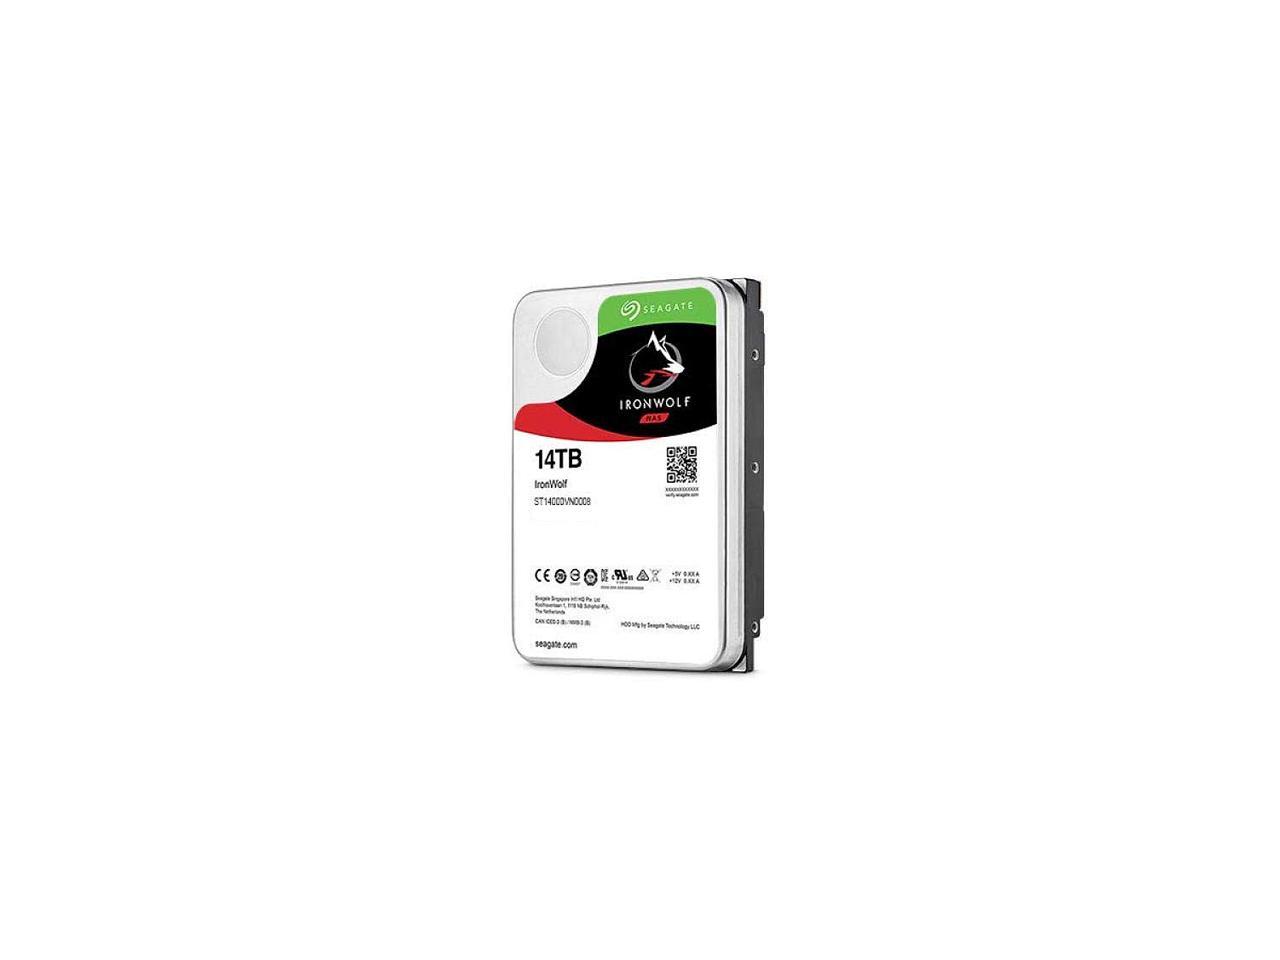 Seagate Ironwolf 12Tb Nas Hard Drive 7200 Rpm 256Mb Cache Sata 6.0Gb/S Cmr 3.5" Internal Hdd For Raid Network Attached Storage St12000Vn0008 - Oem